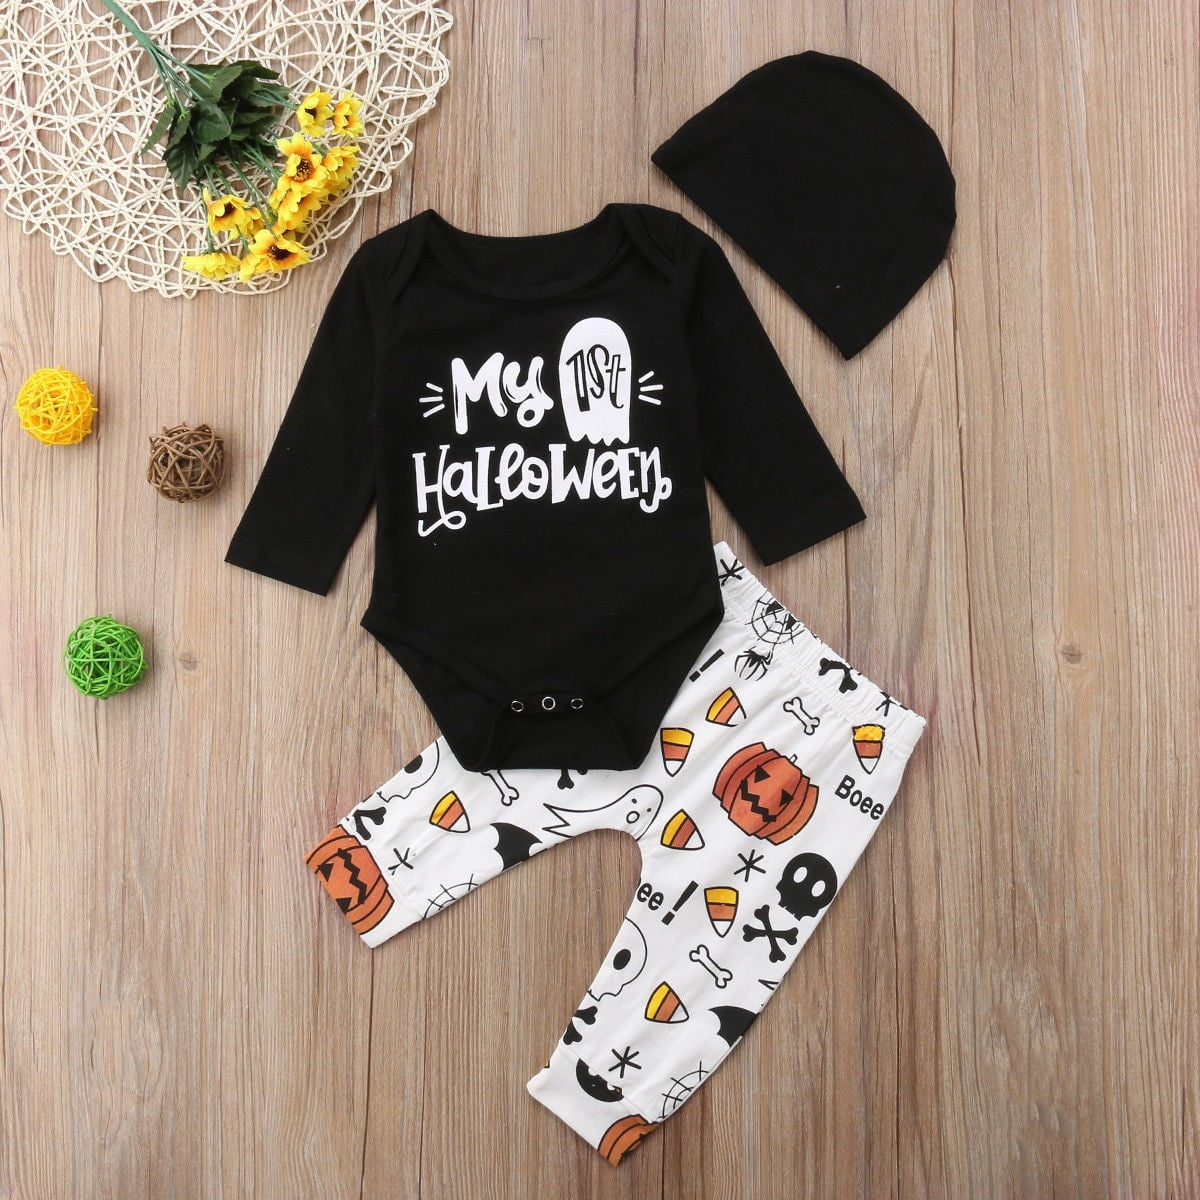 Long Pants Clothing Set for Kids Halloween Costume Outfits Gifts Weant Newborn Infant Toddler Baby Clothes Flower Skull Hoodies Sweatshirts Boys Girls Unisex Clothes for 0-24 Months